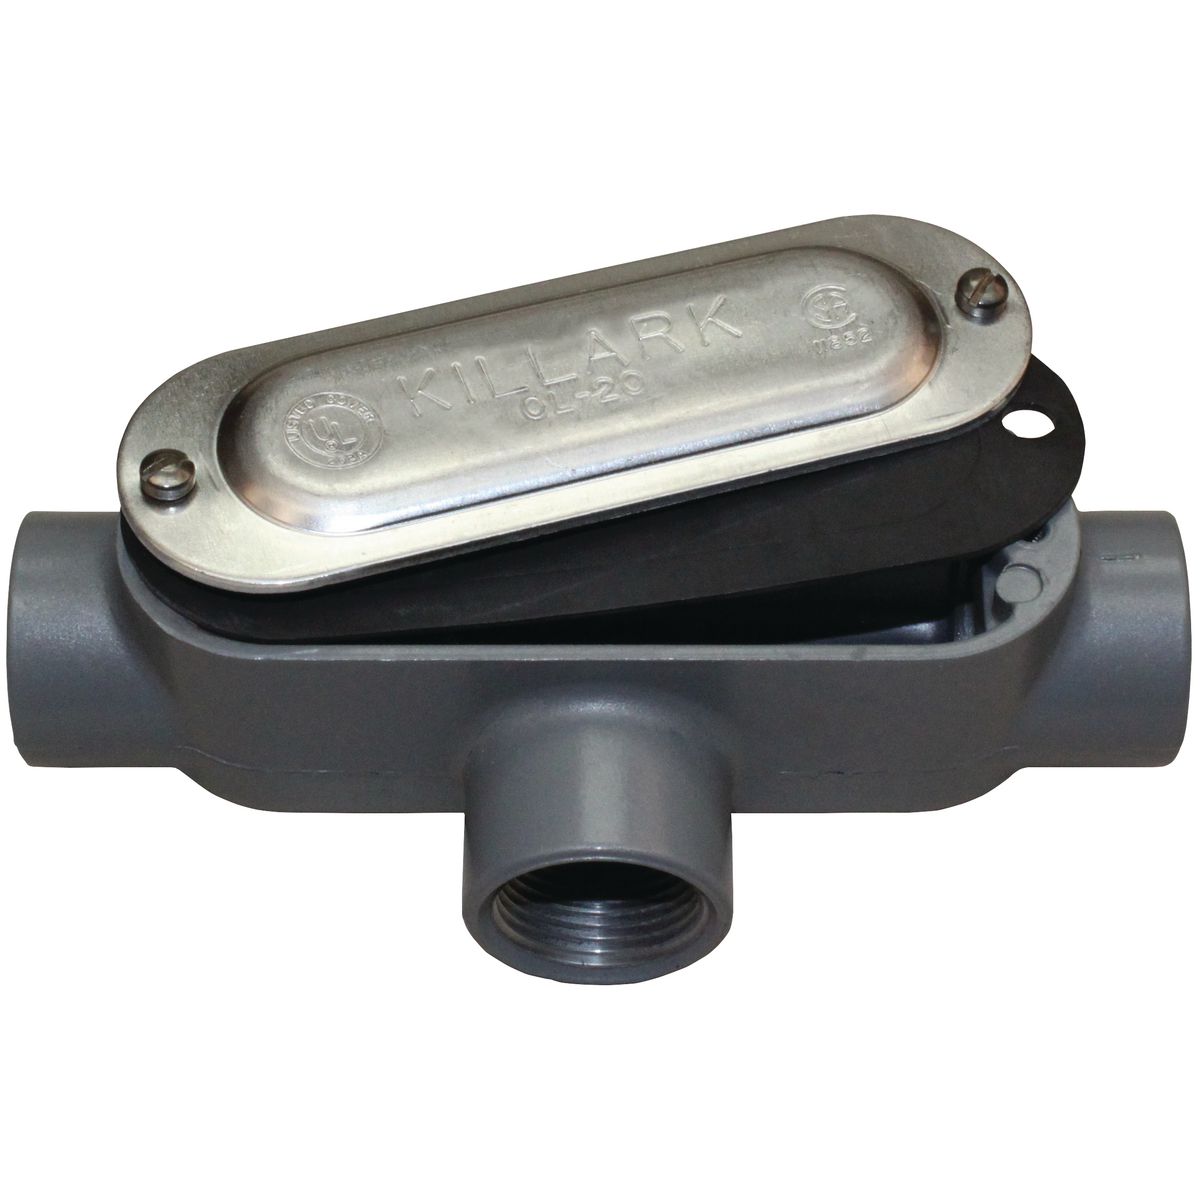 O SERIES/DURALOY 5 SERIES - ALUMINUM CONDUIT BODY WITH COVER AND GASKET- T TYPE - HUB SIZE 1/2 INCH - VOLUME 4.0 CUBIC INCHES